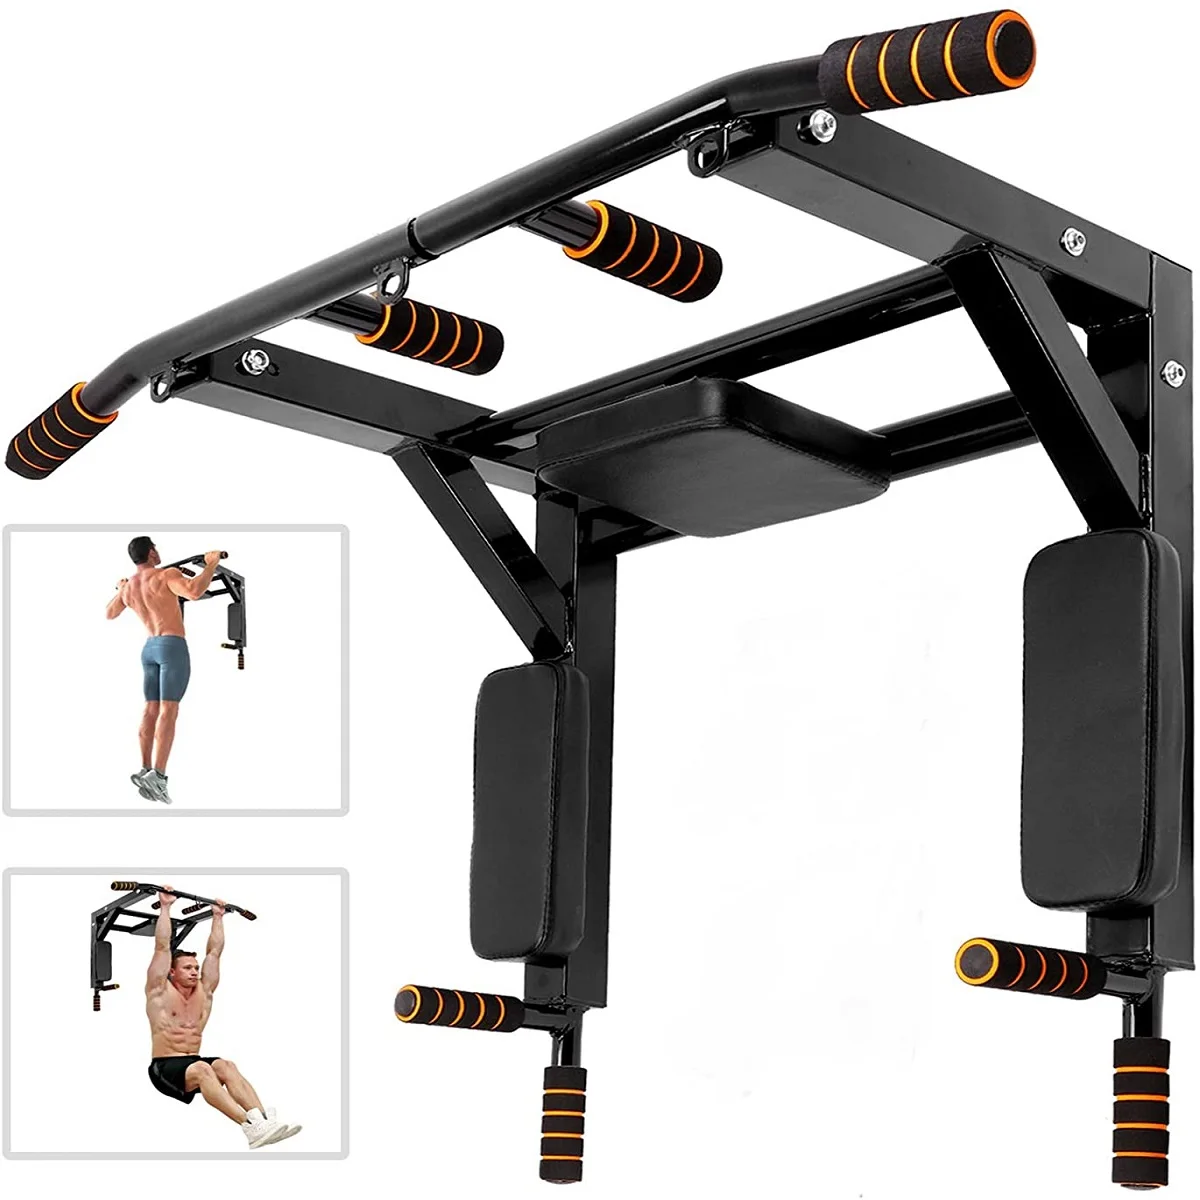 Permalink to Horizontal Bars Wall Mounted Pull Up Chin Up Bar Home Gym Workout Muscle Training Multifunction Fitness Equipments Exercise